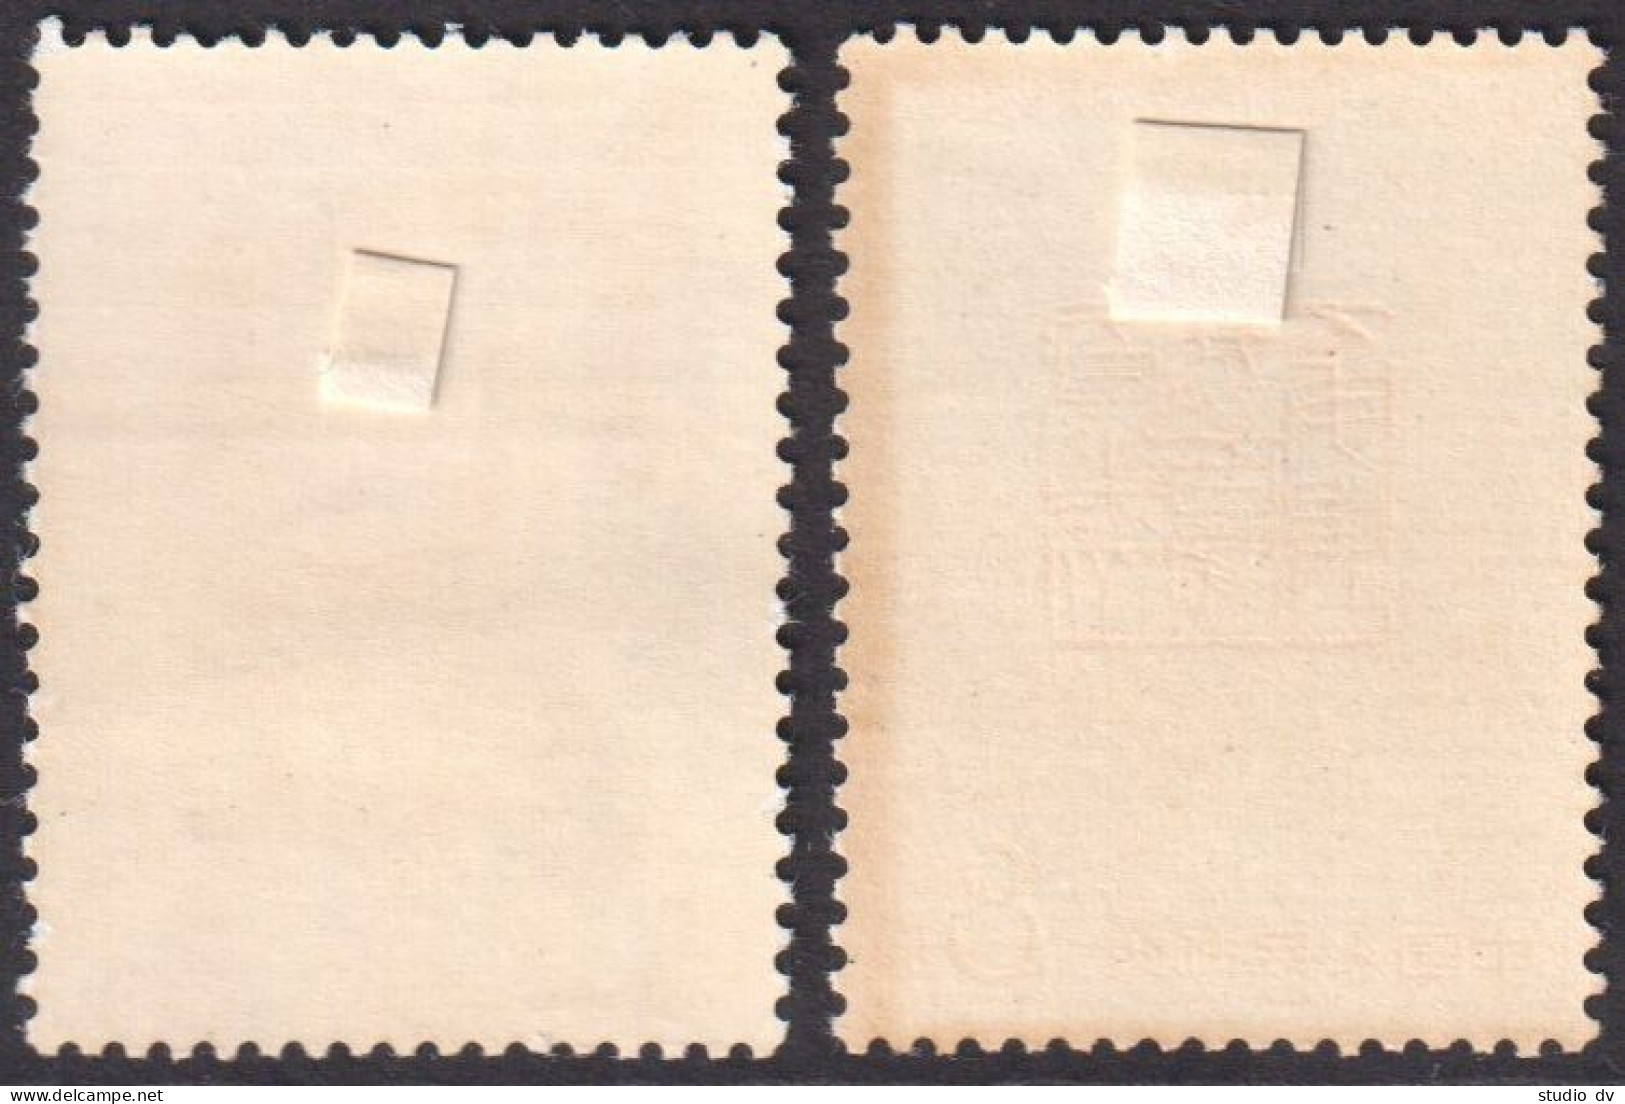 China PRC 1960 National Congress Of Literature And Art Mi 551-552 MH - Unused Stamps